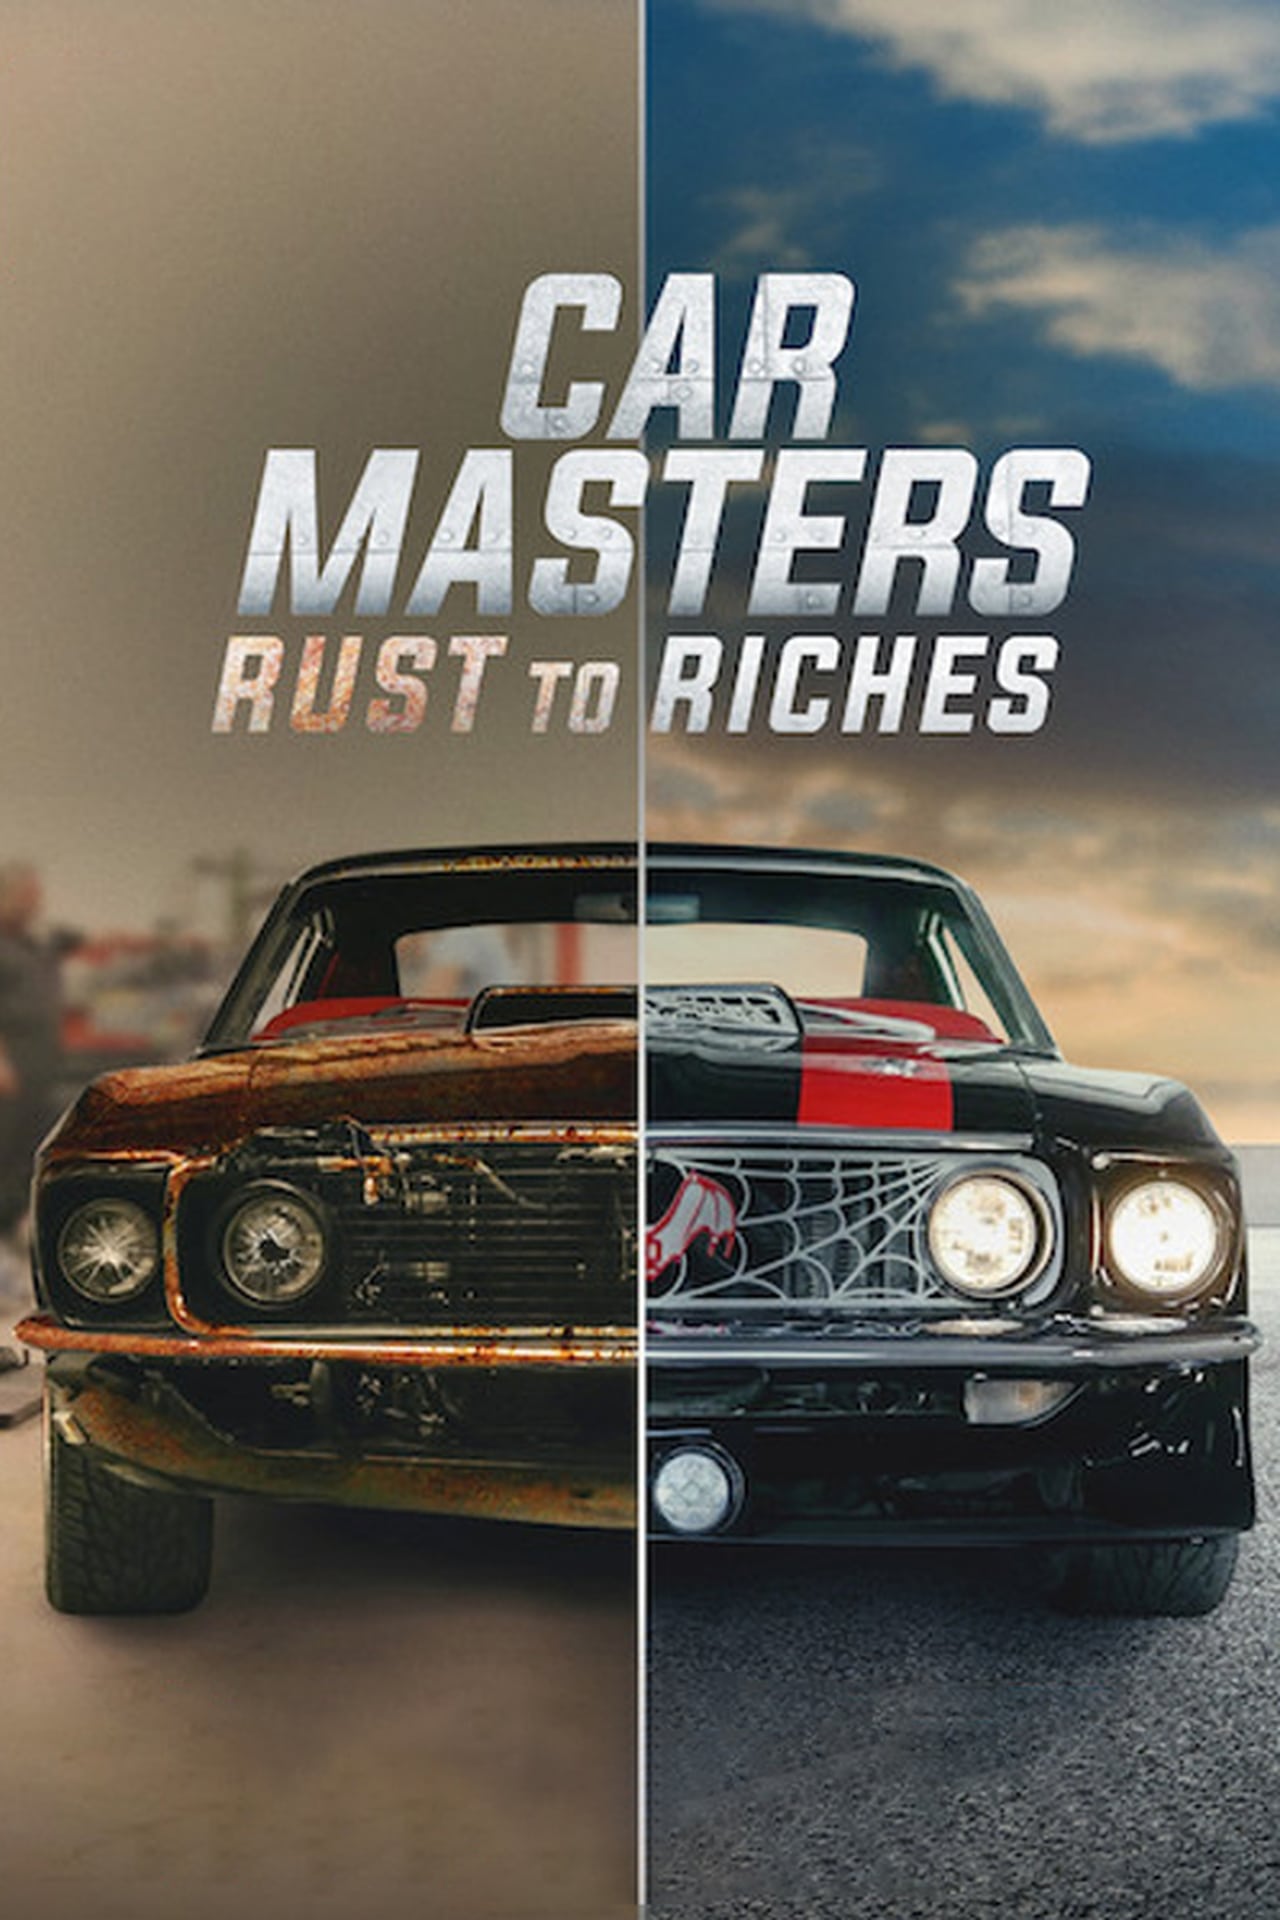 Image Car Masters: Rust to Riches